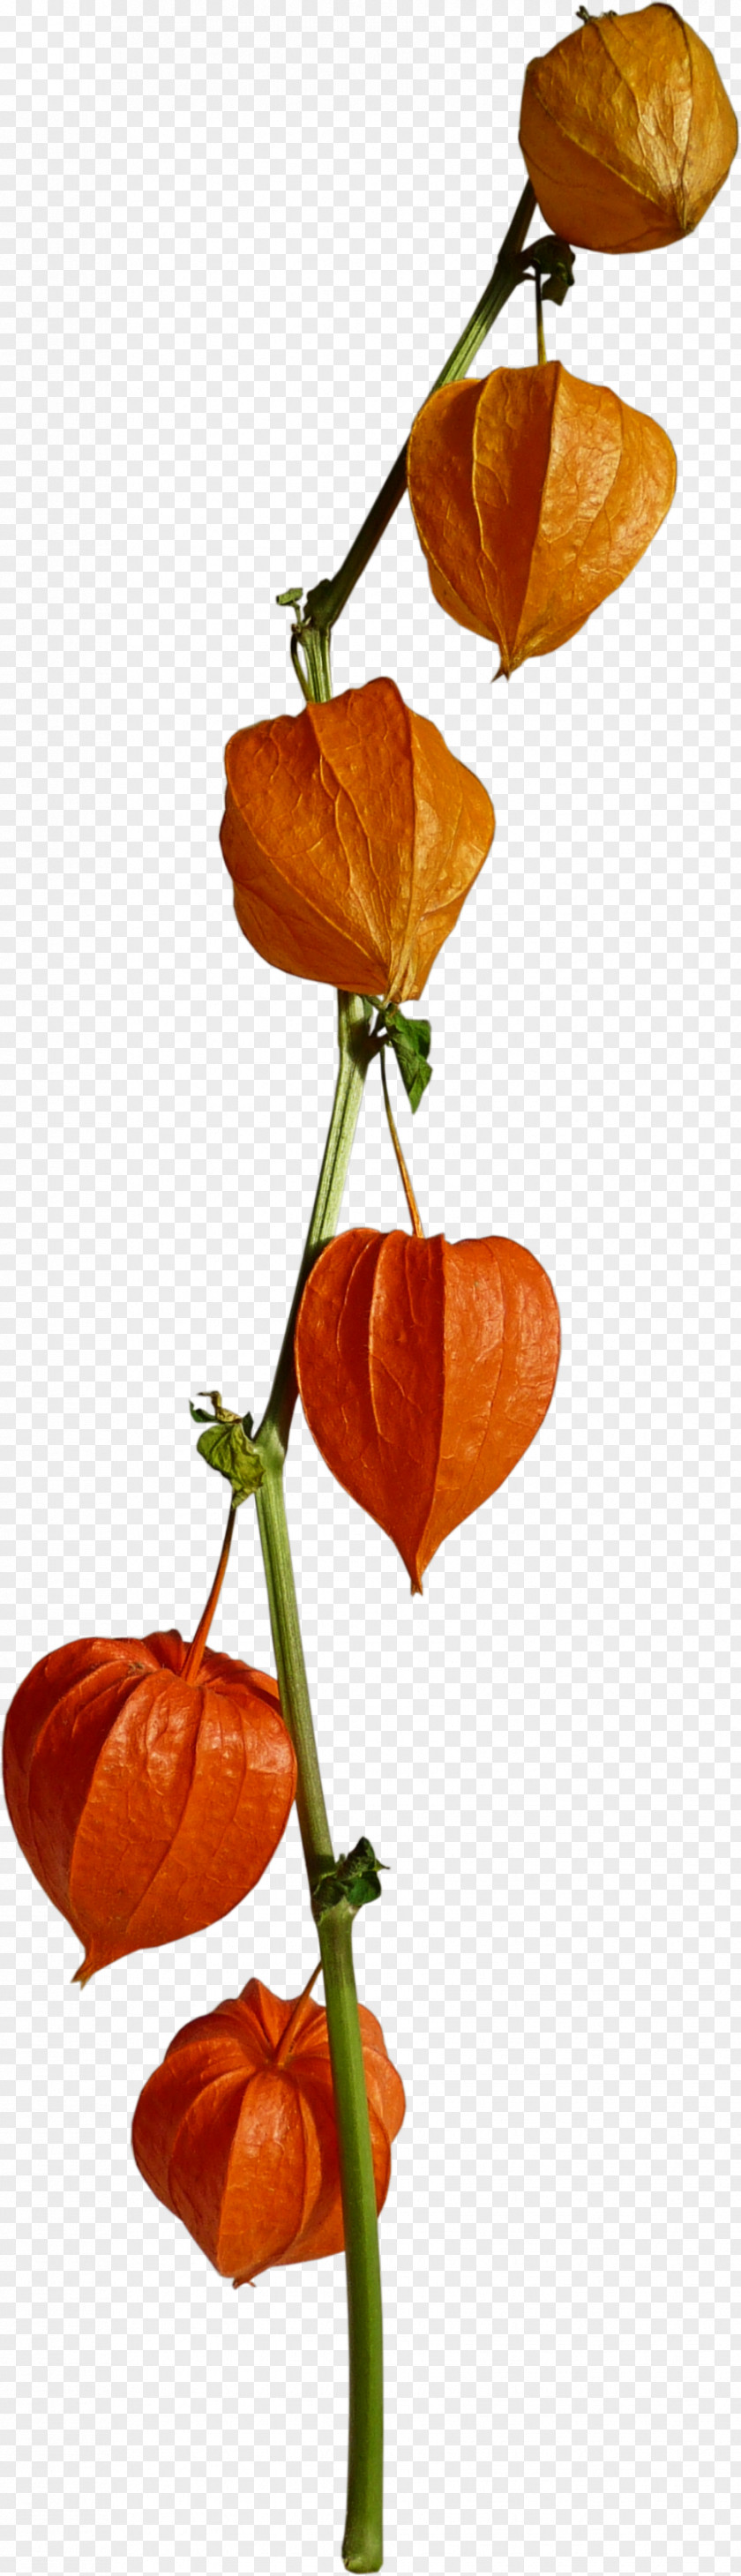 Physalis Image Vector Graphics Centerblog PNG